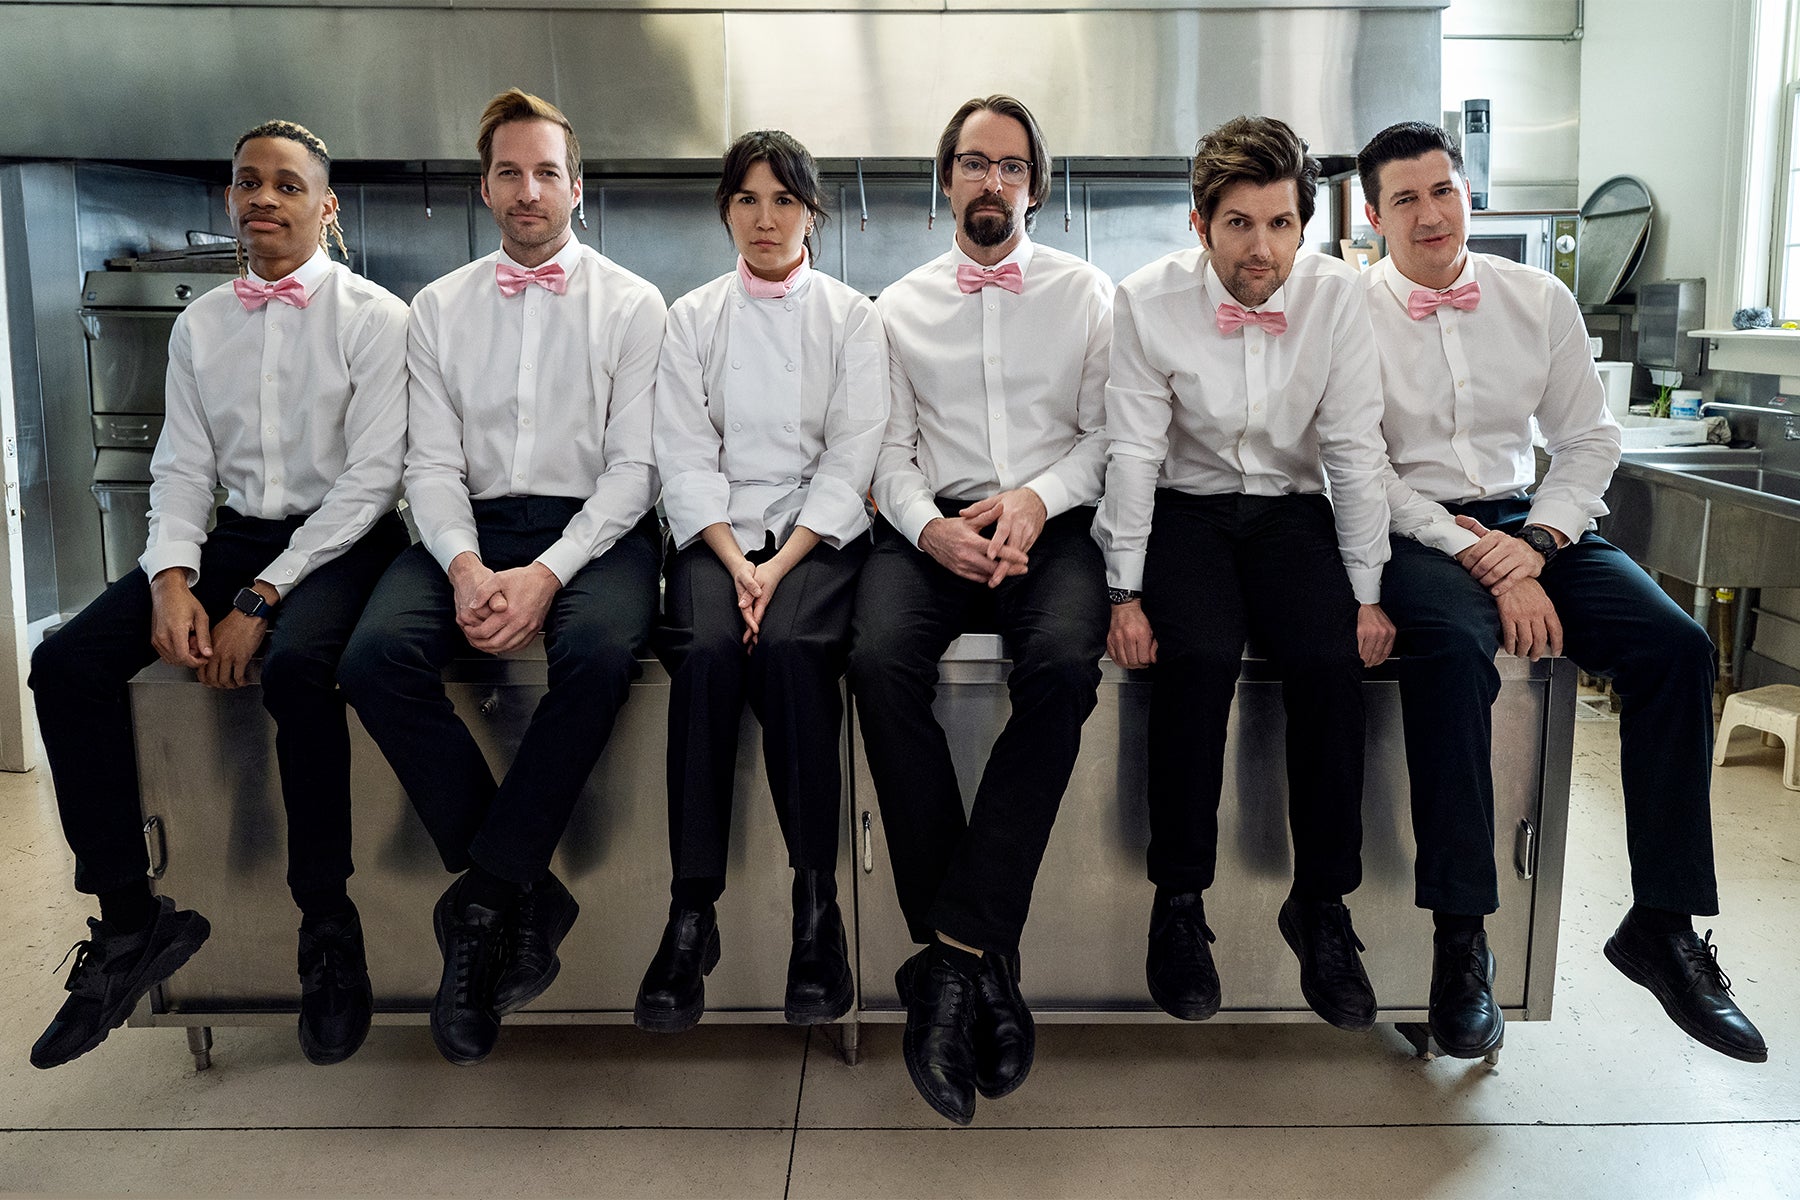 Six caterers in white shirts, pink bow ties, and black pants sit across a counter.